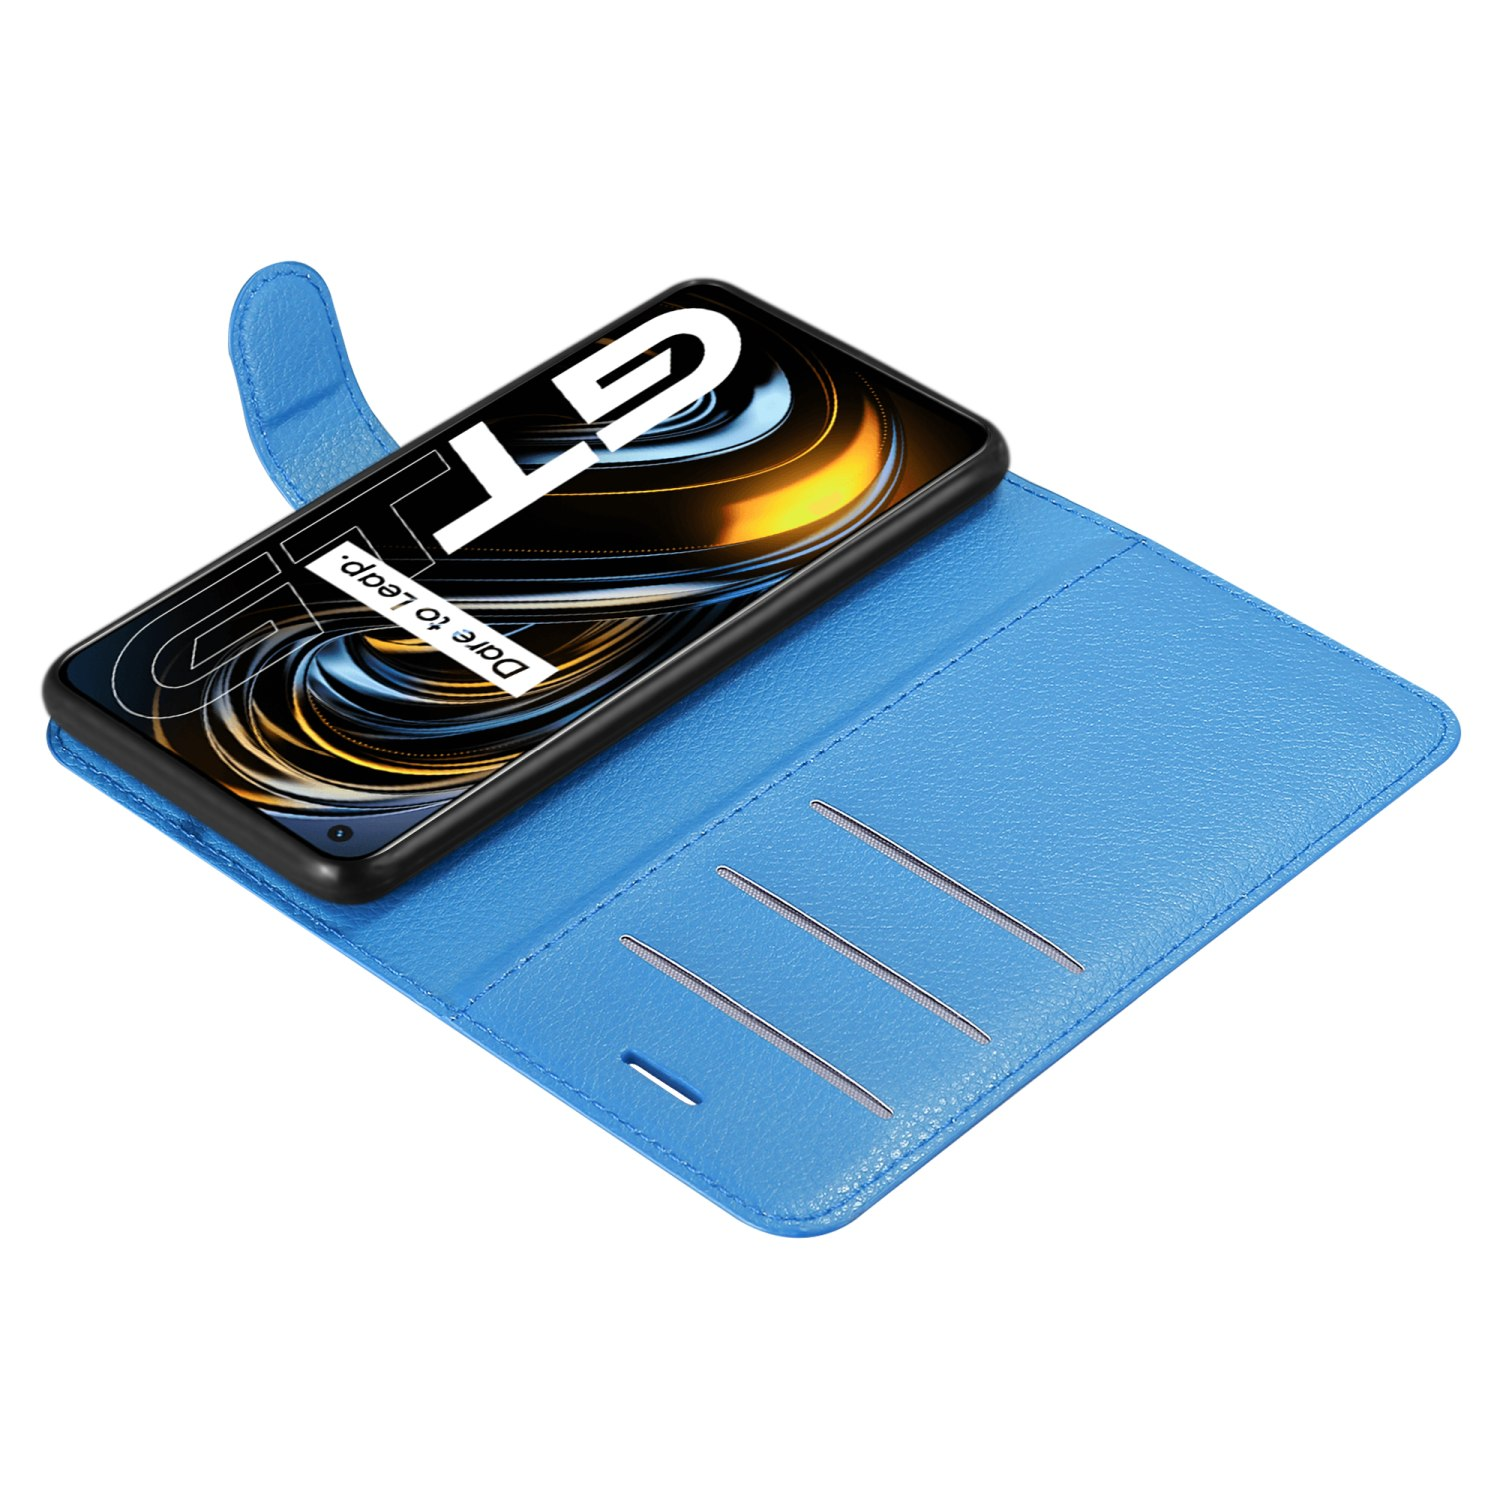 Bookcover, GT Realme, BLAU PASTELL Book / Hülle Q3 PRO, 2T / Neo Standfunktion, GT CADORABO